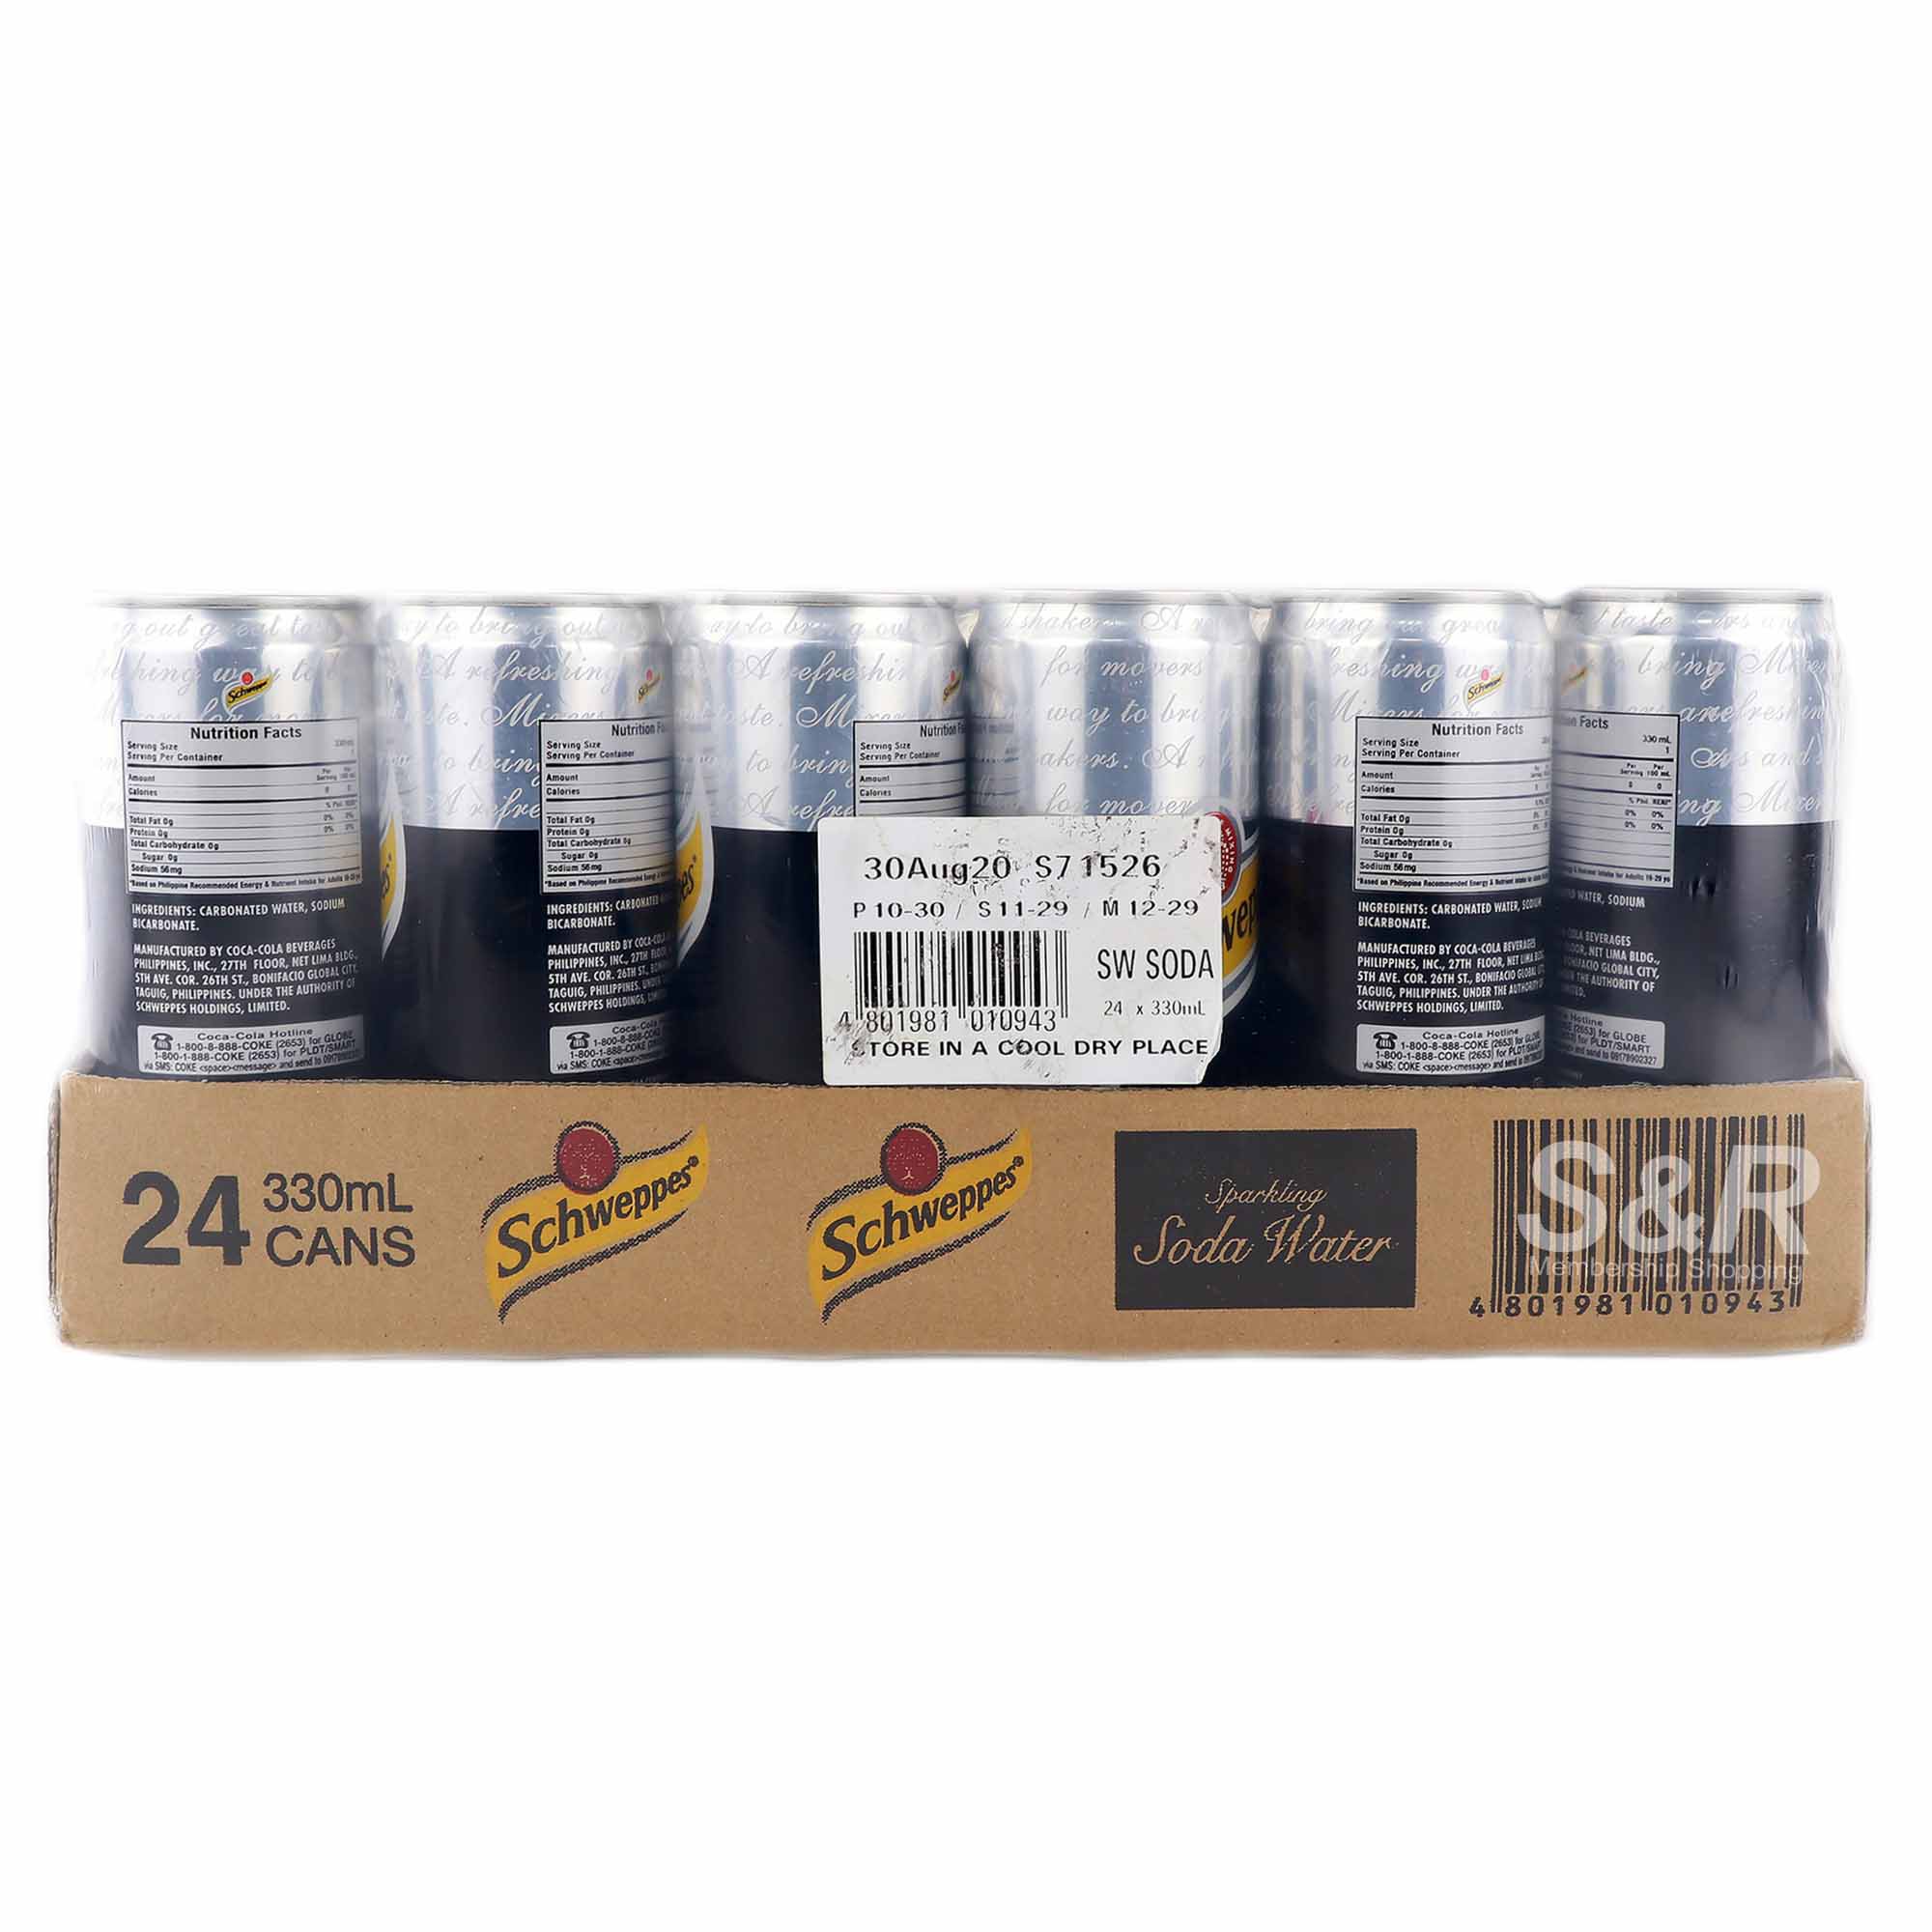 Schweppes Sparkling Soda Water 24 cans